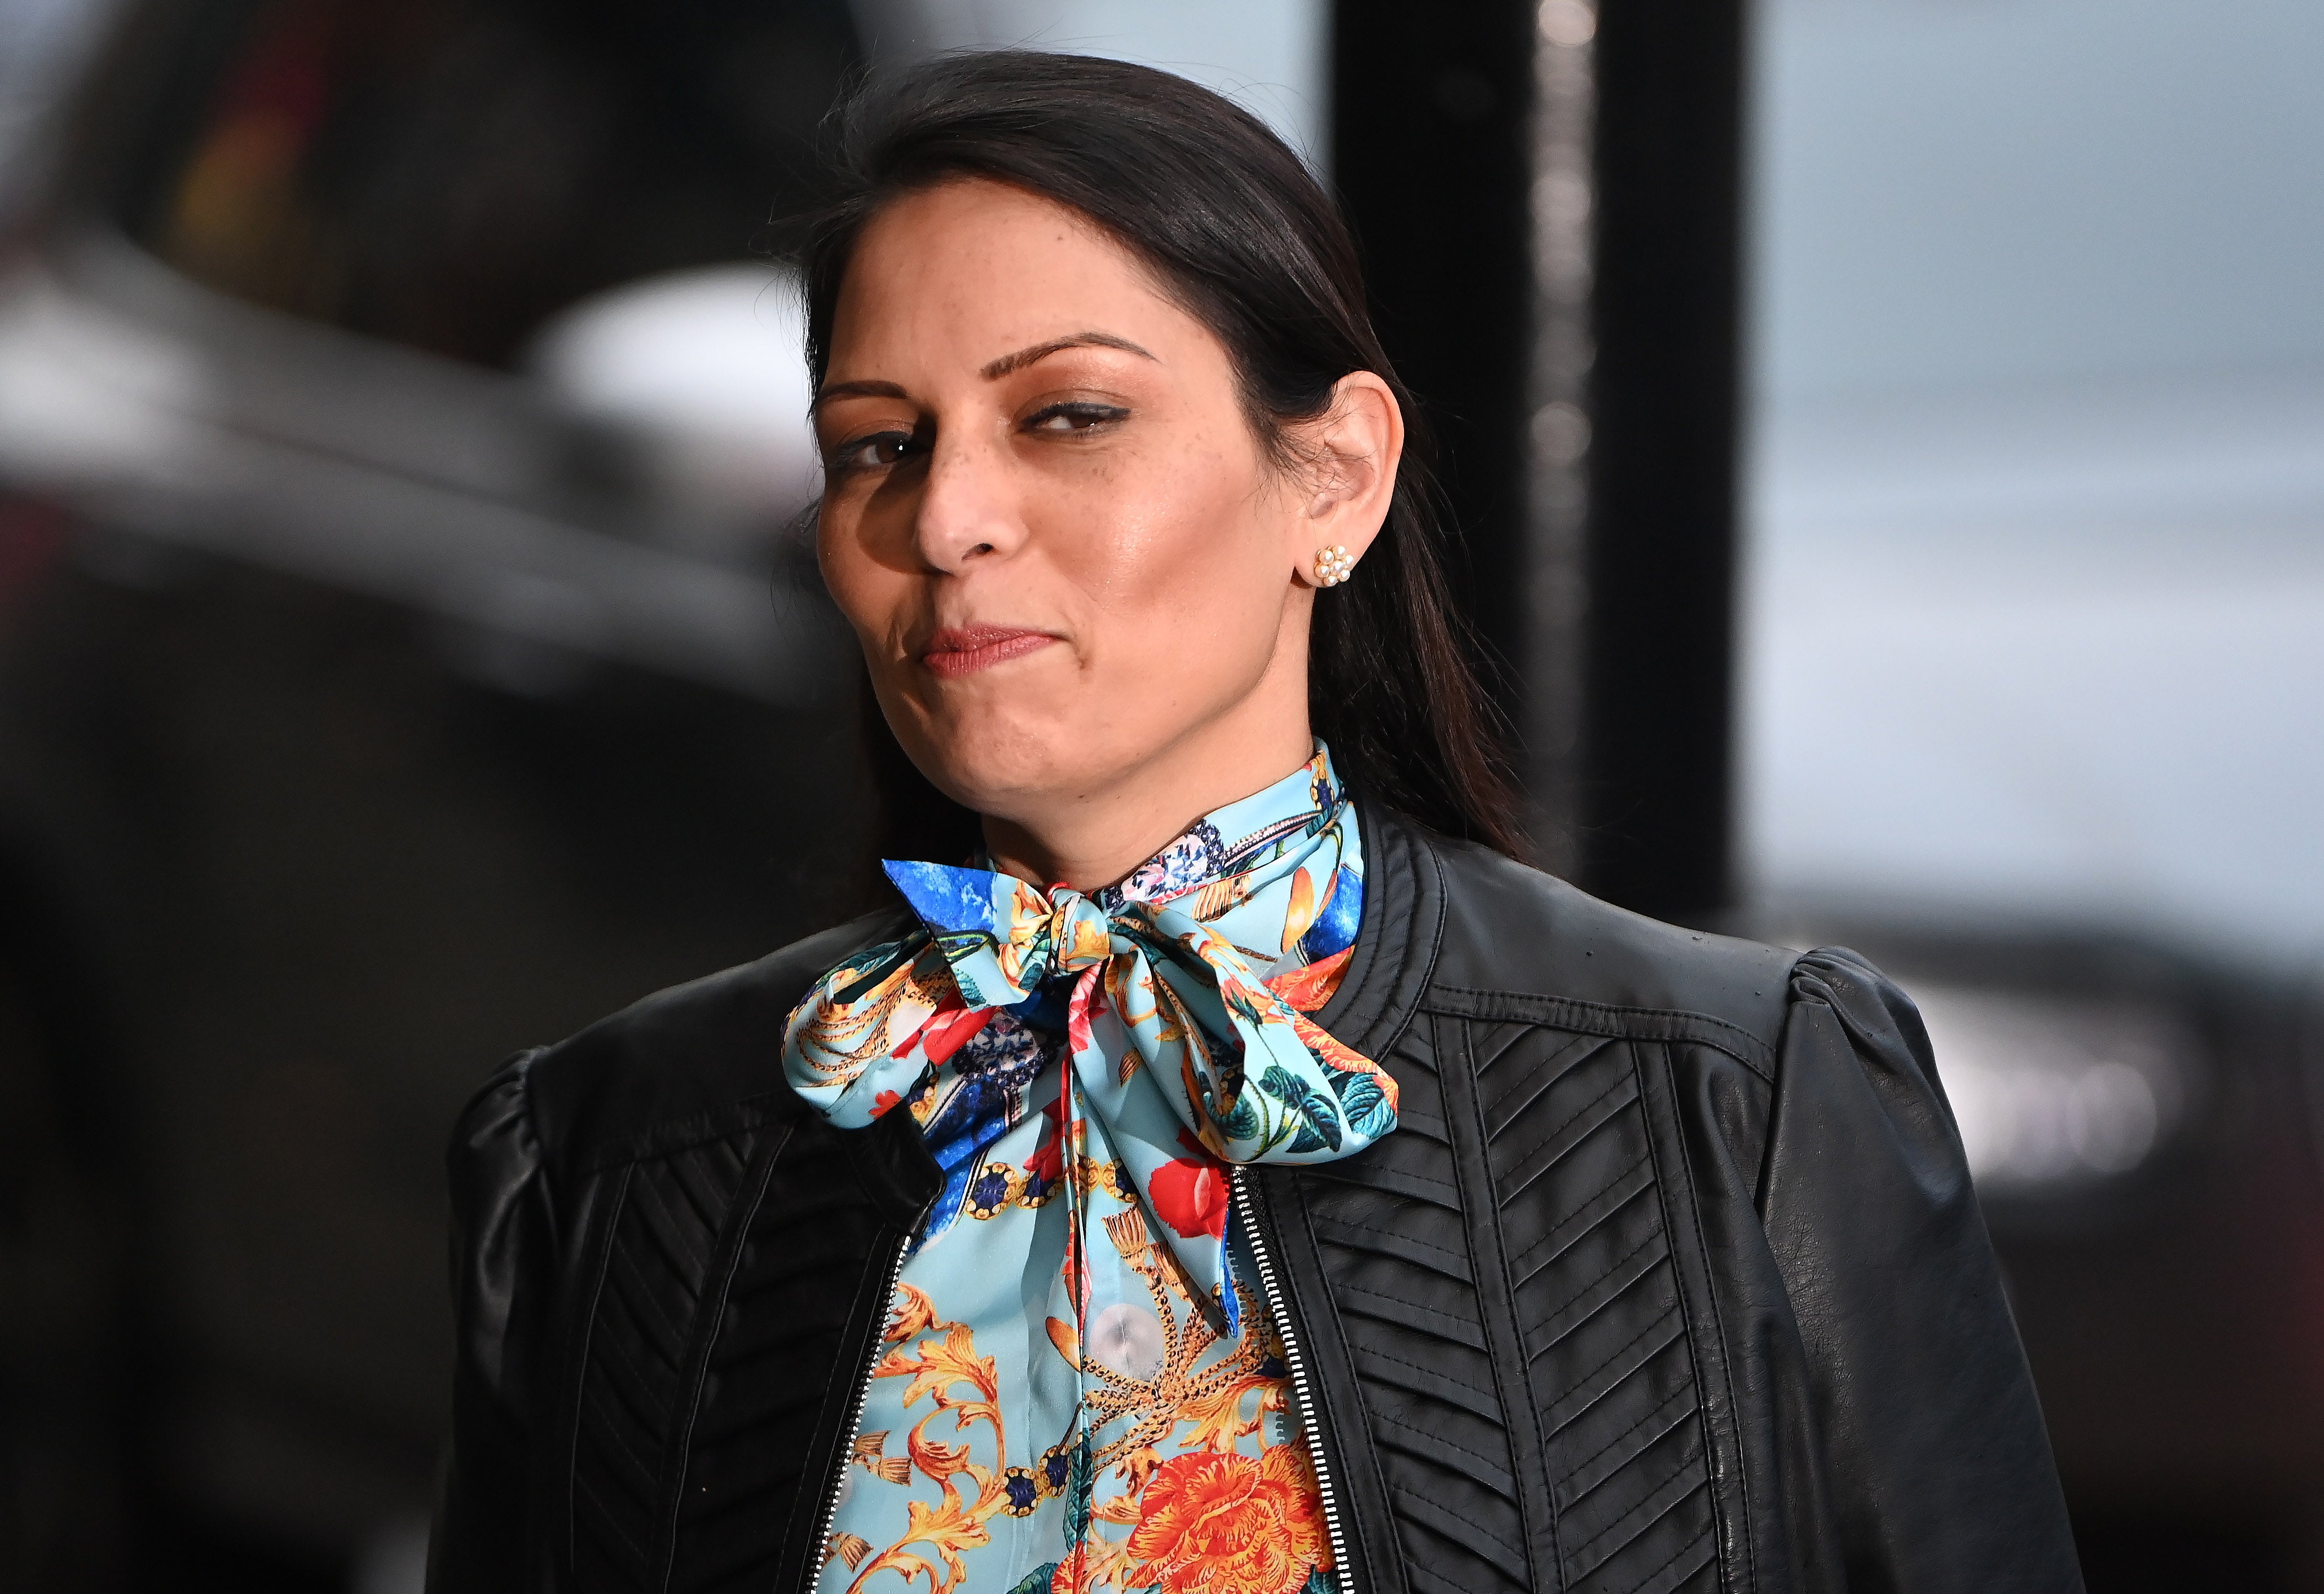 ‘We can’t carry on like this,’ the home secretary Priti Patel has said